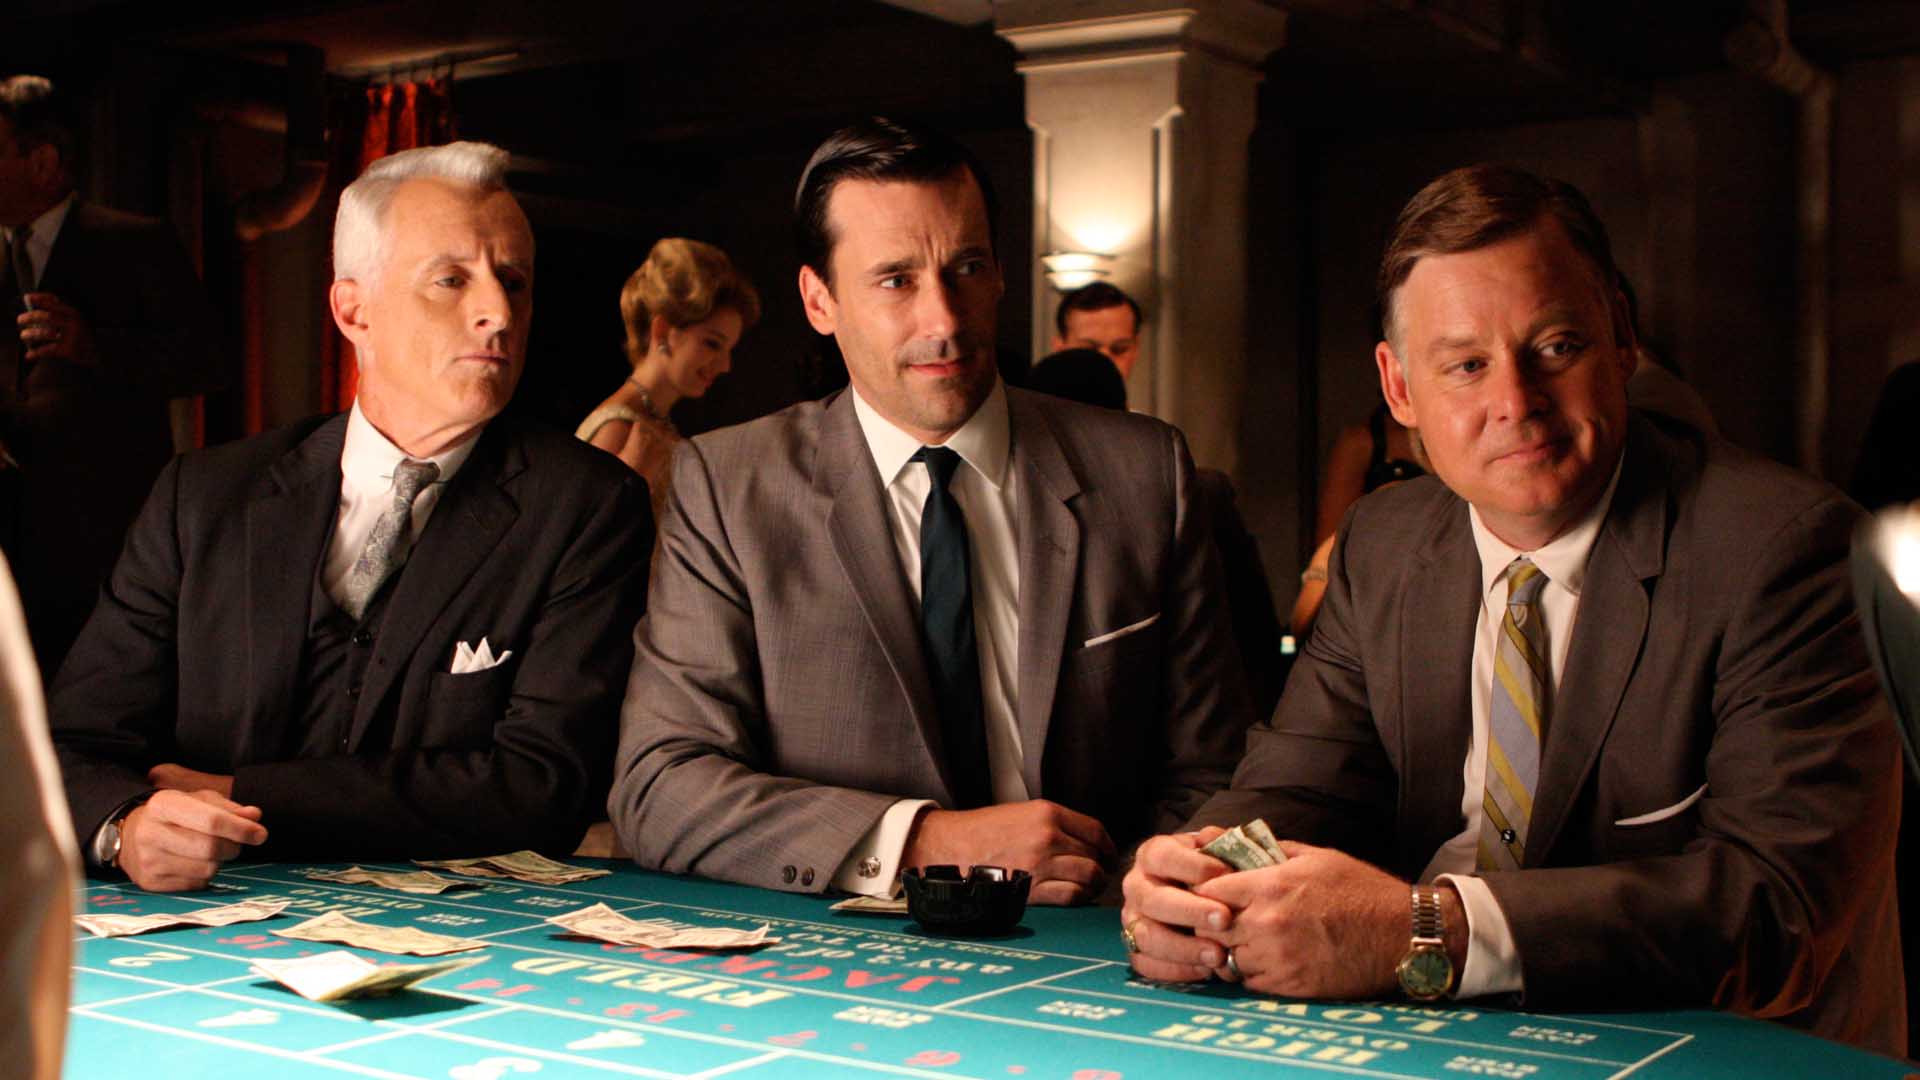 Mad Men S2E9: “Six Month Leave”